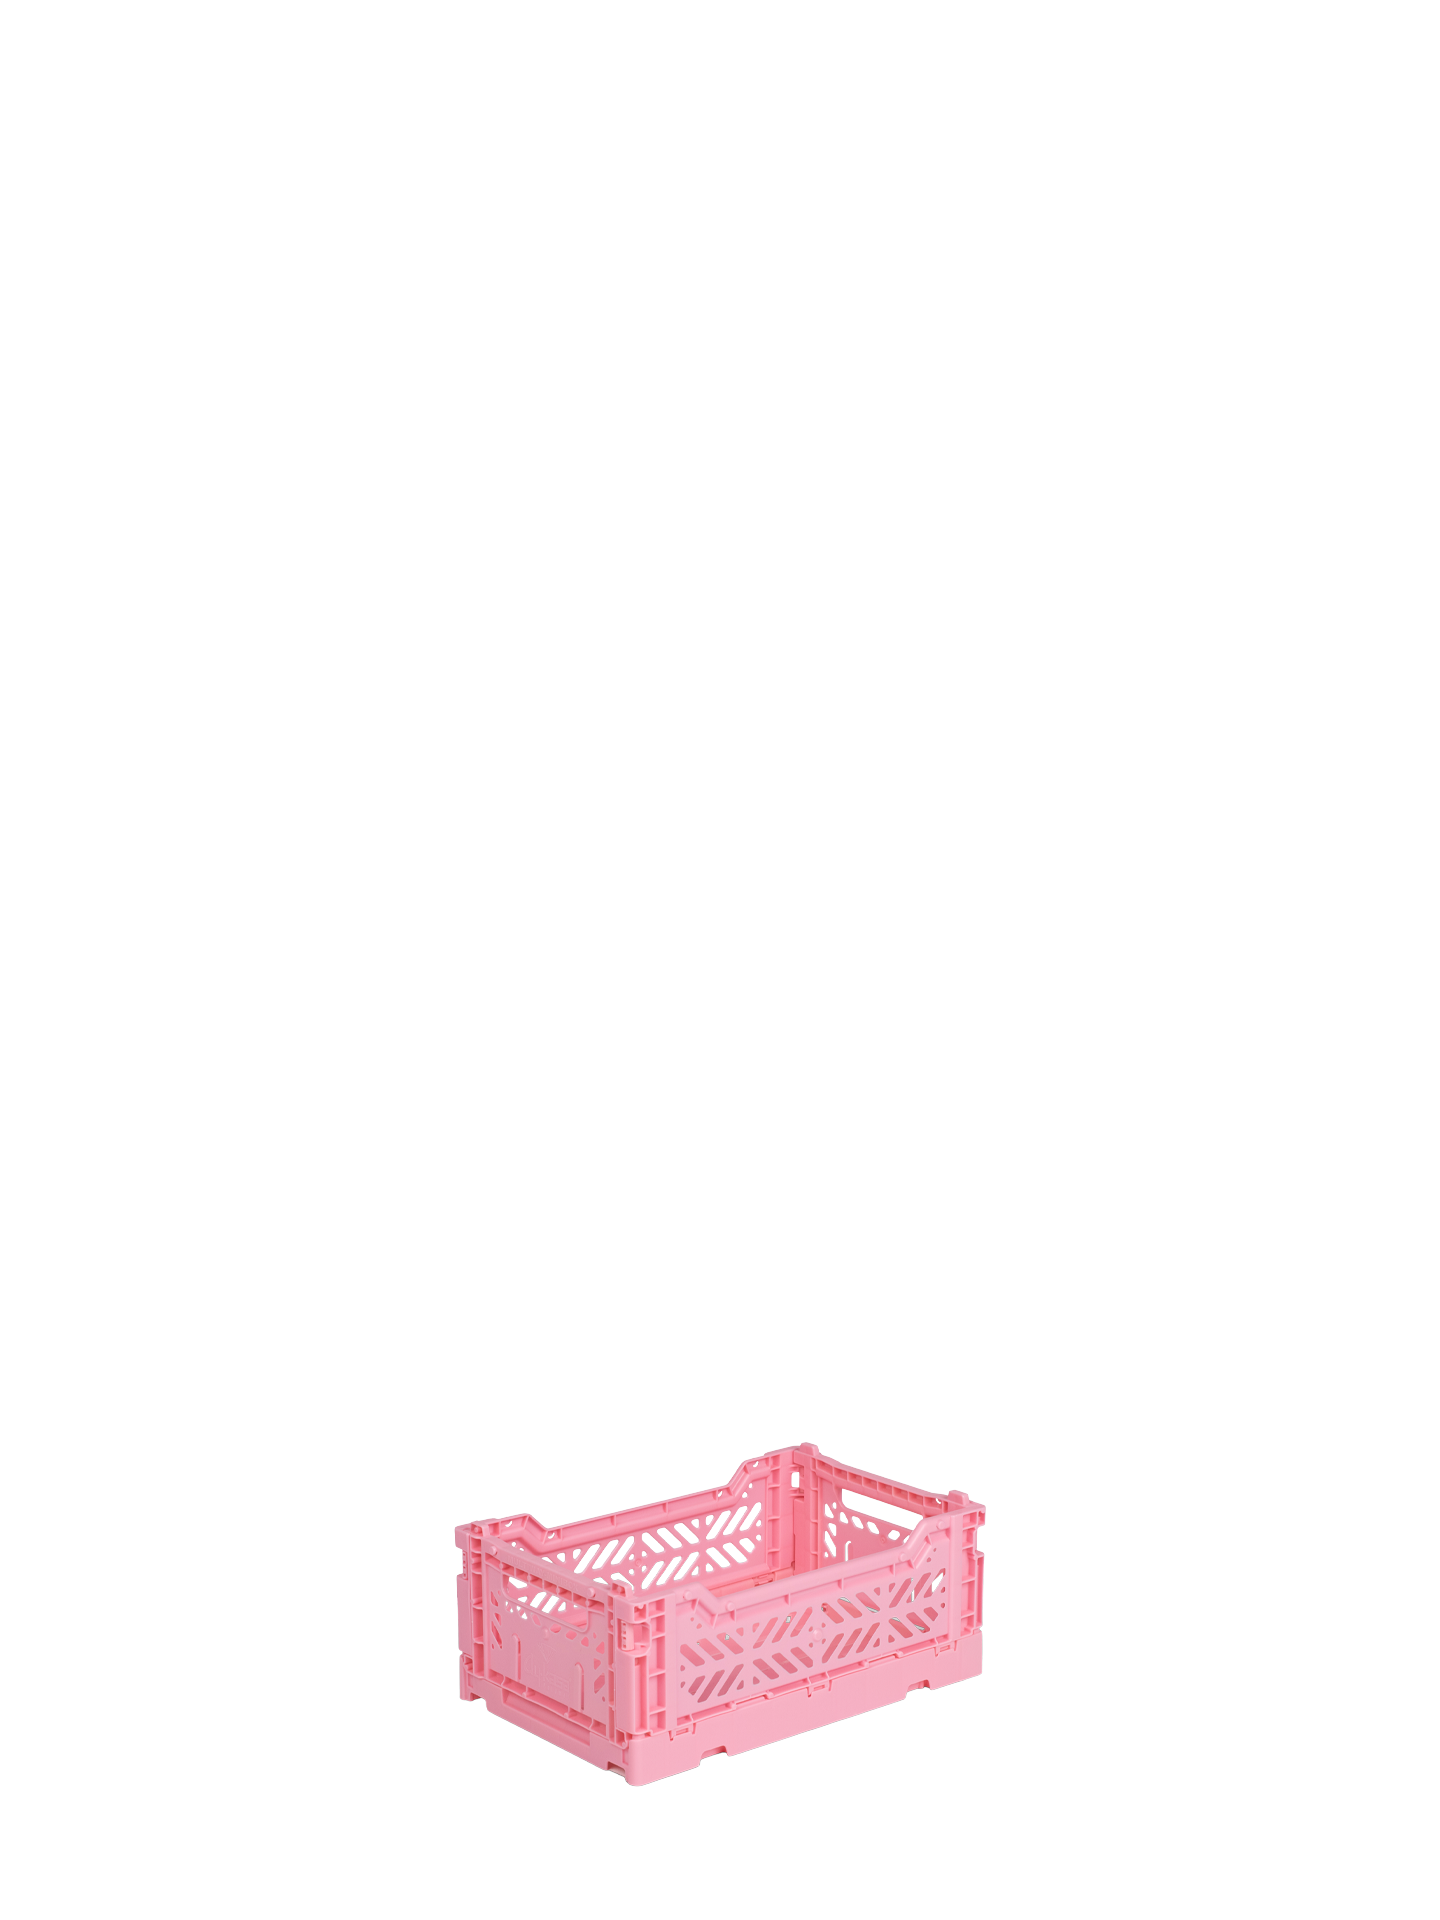 Mini Aykasa crate in baby pink stacks and folds